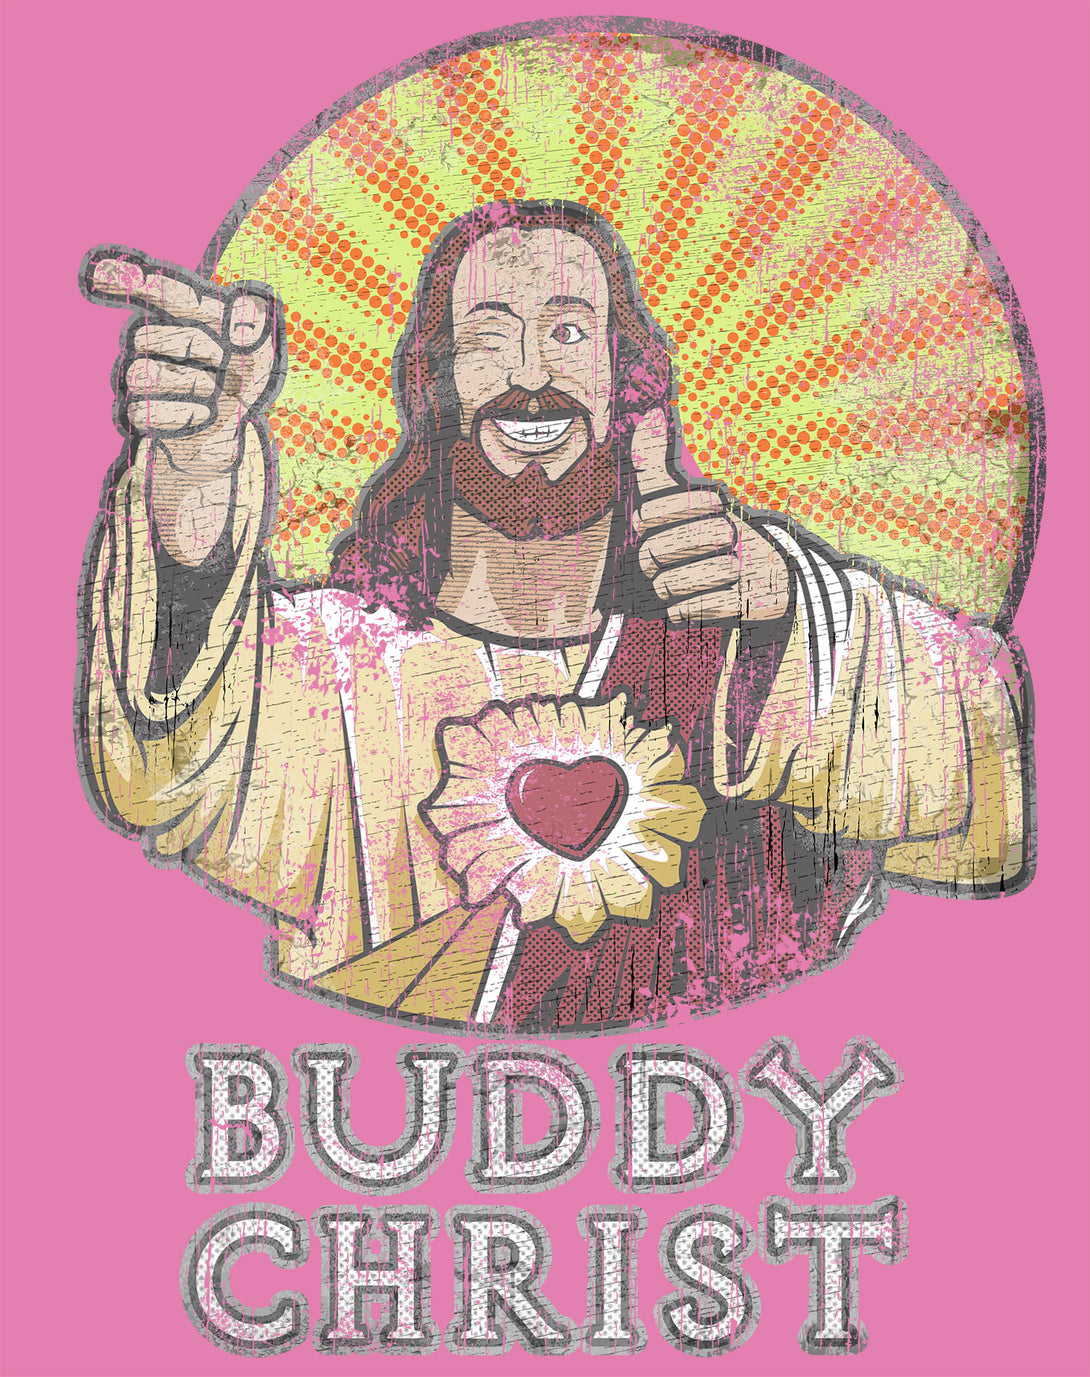 Kevin Smith View Askewniverse Buddy Christ Got Summer Vintage Variant Official Women's T-Shirt Pink - Urban Species Design Close Up